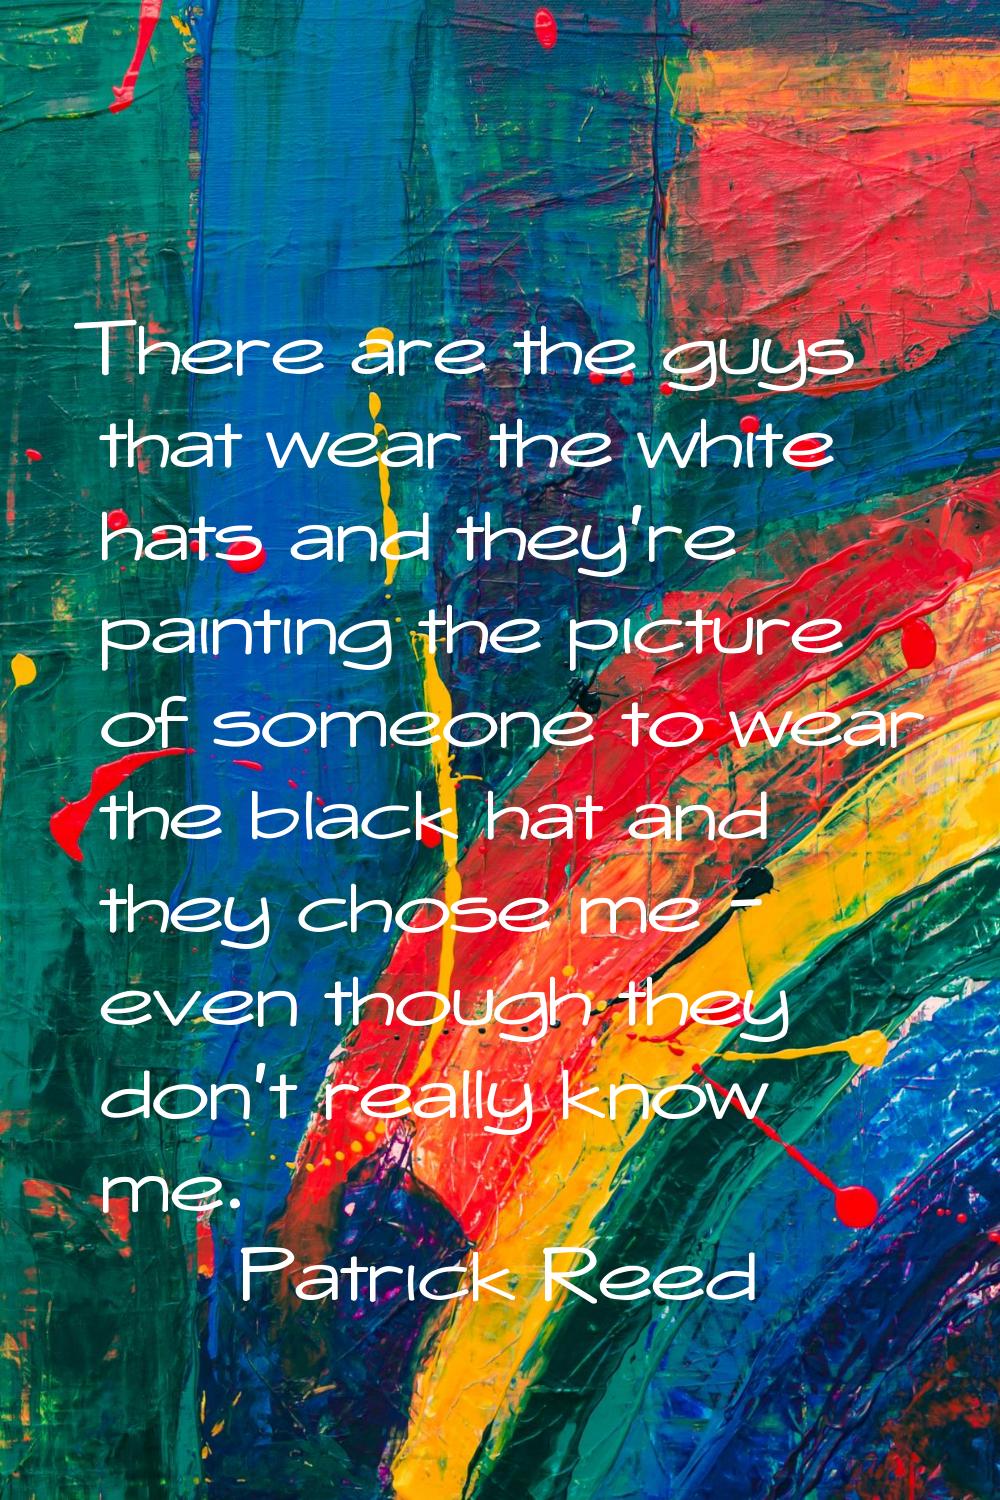 There are the guys that wear the white hats and they're painting the picture of someone to wear the